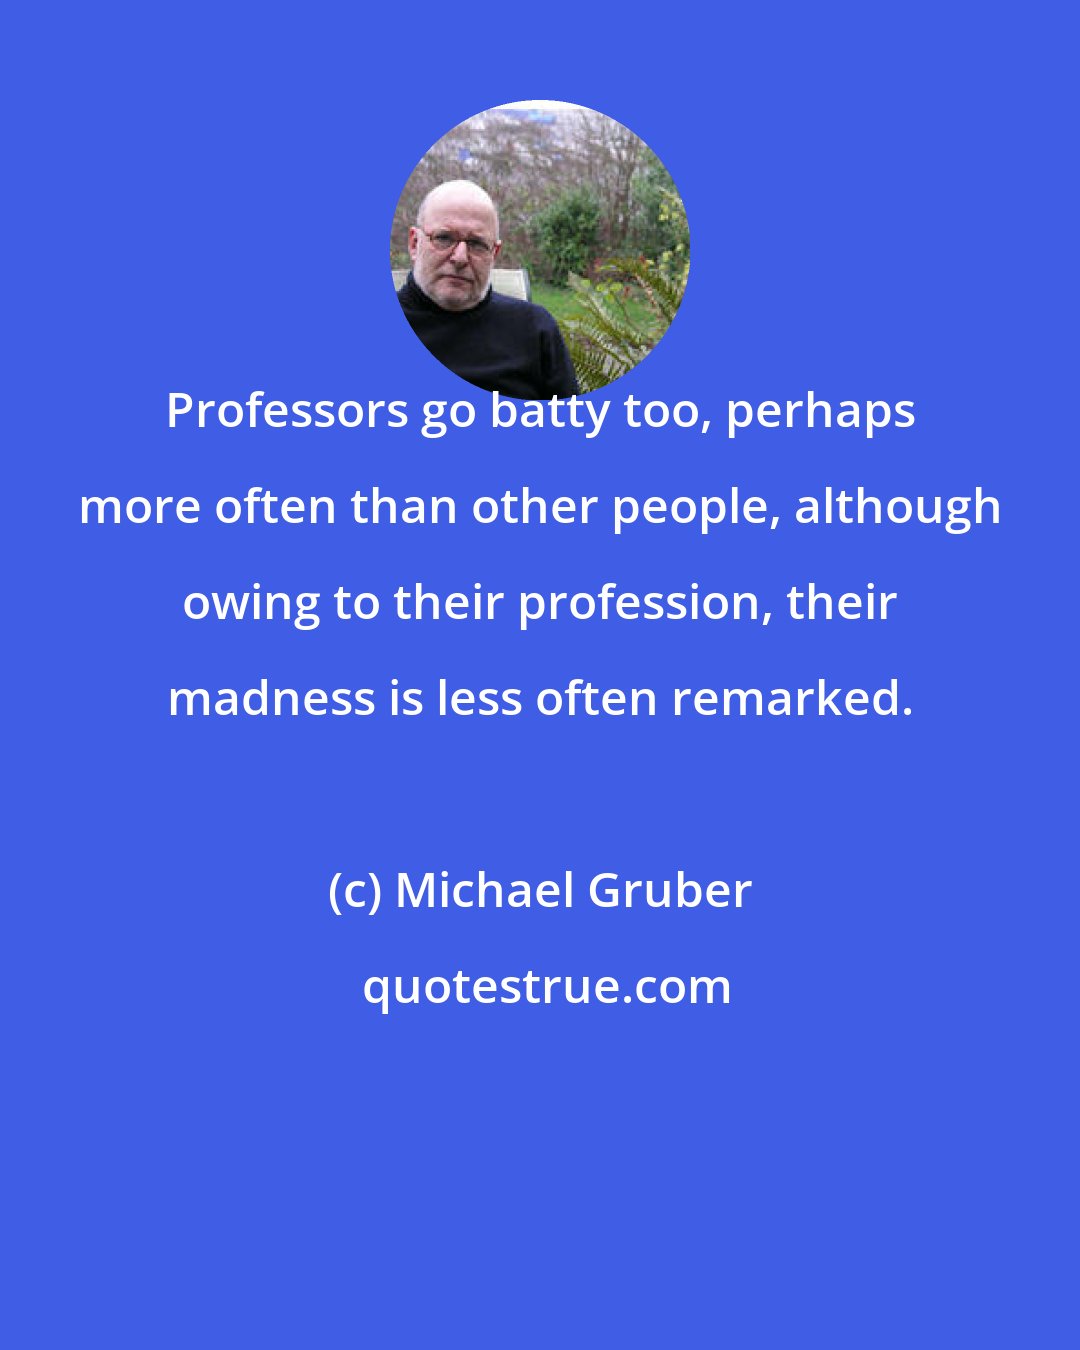 Michael Gruber: Professors go batty too, perhaps more often than other people, although owing to their profession, their madness is less often remarked.